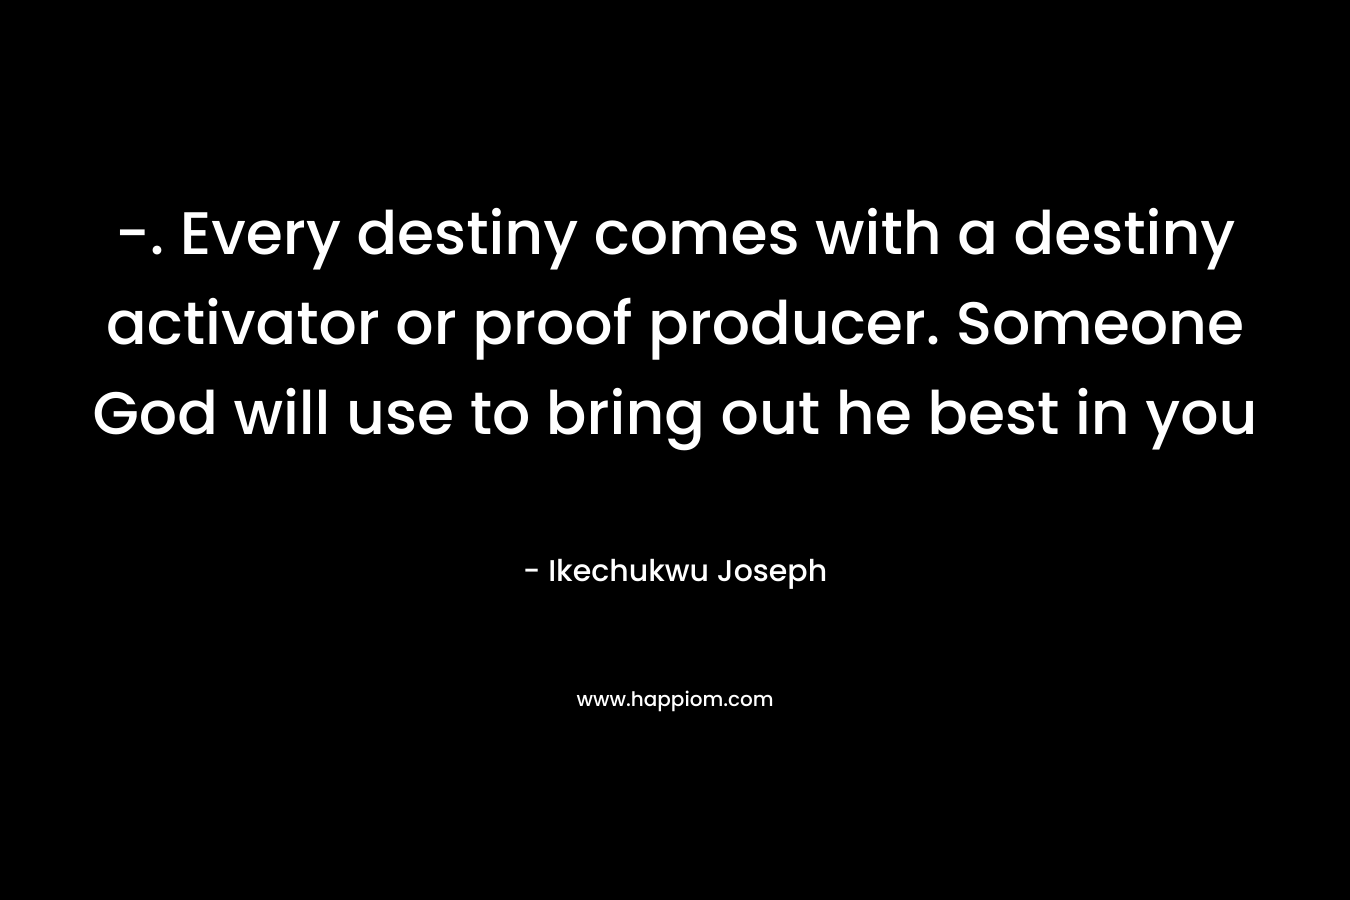 -. Every destiny comes with a destiny activator or proof producer. Someone God will use to bring out he best in you